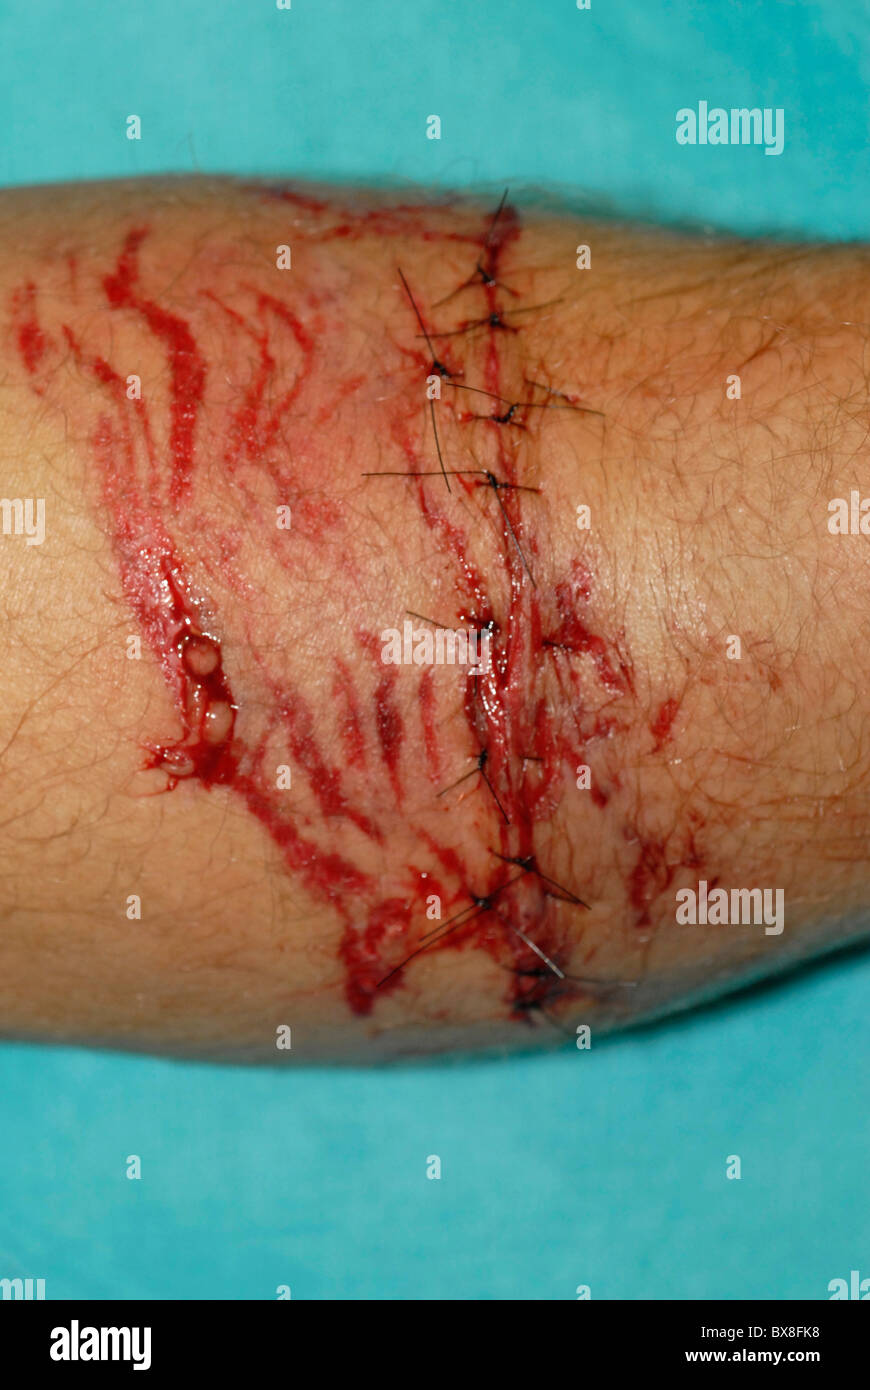 Sutured dogbite lacerations Stock Photo